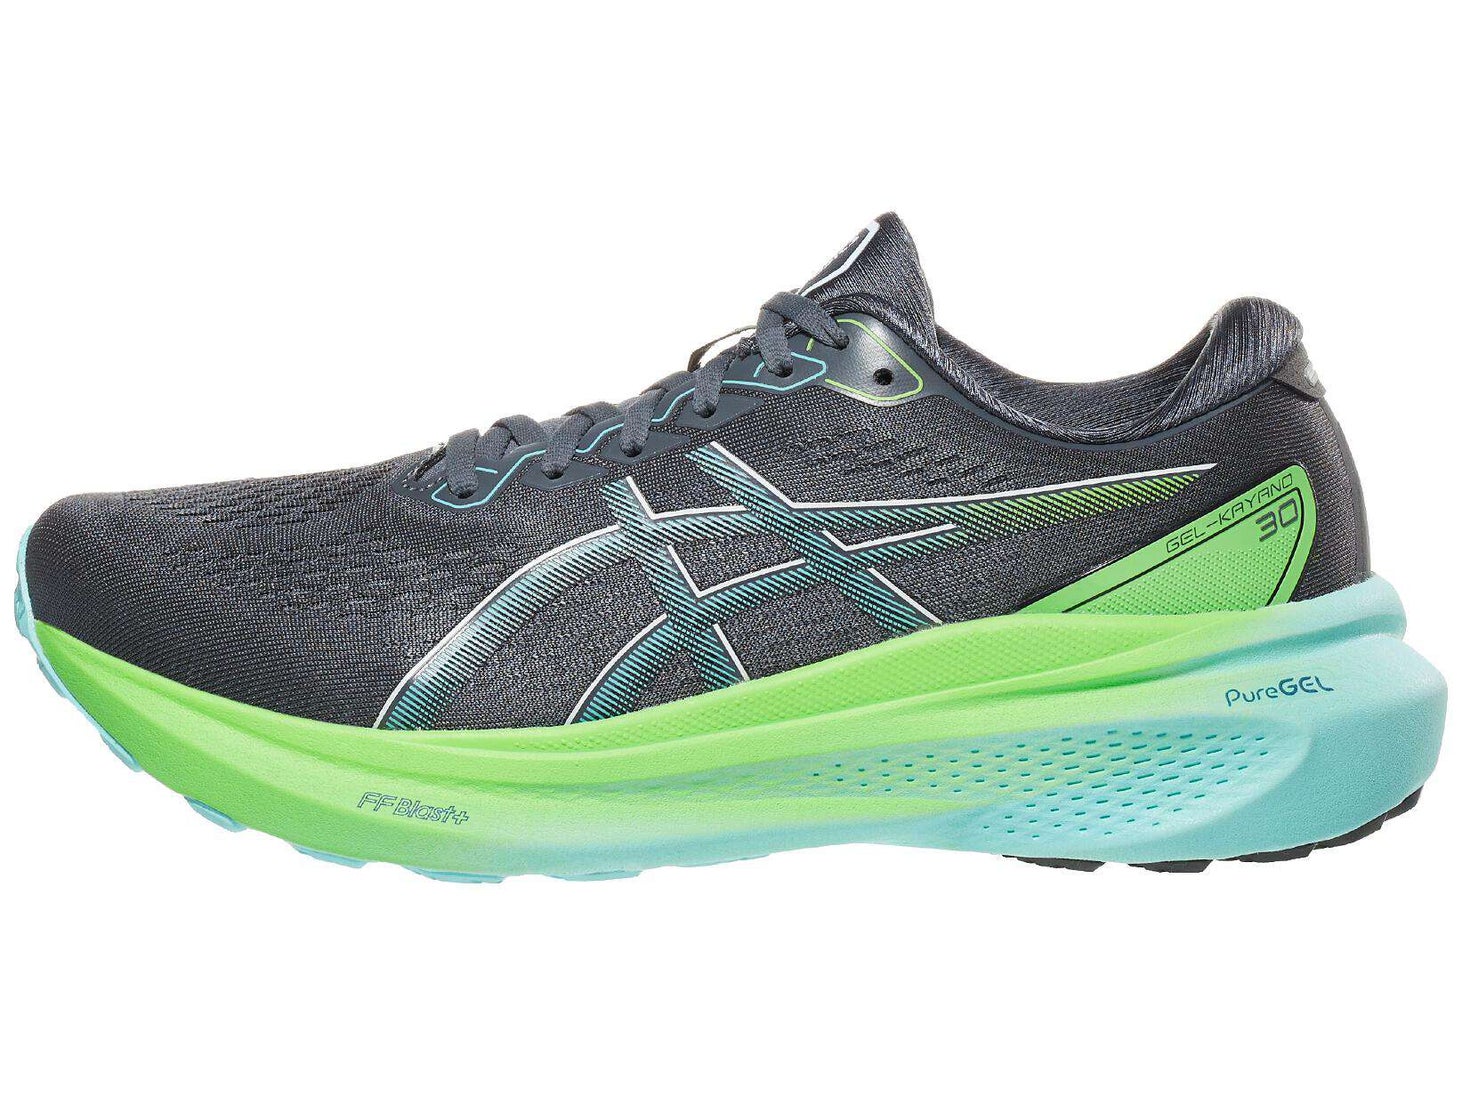 ASICS Gel Kayano 30 in mint color